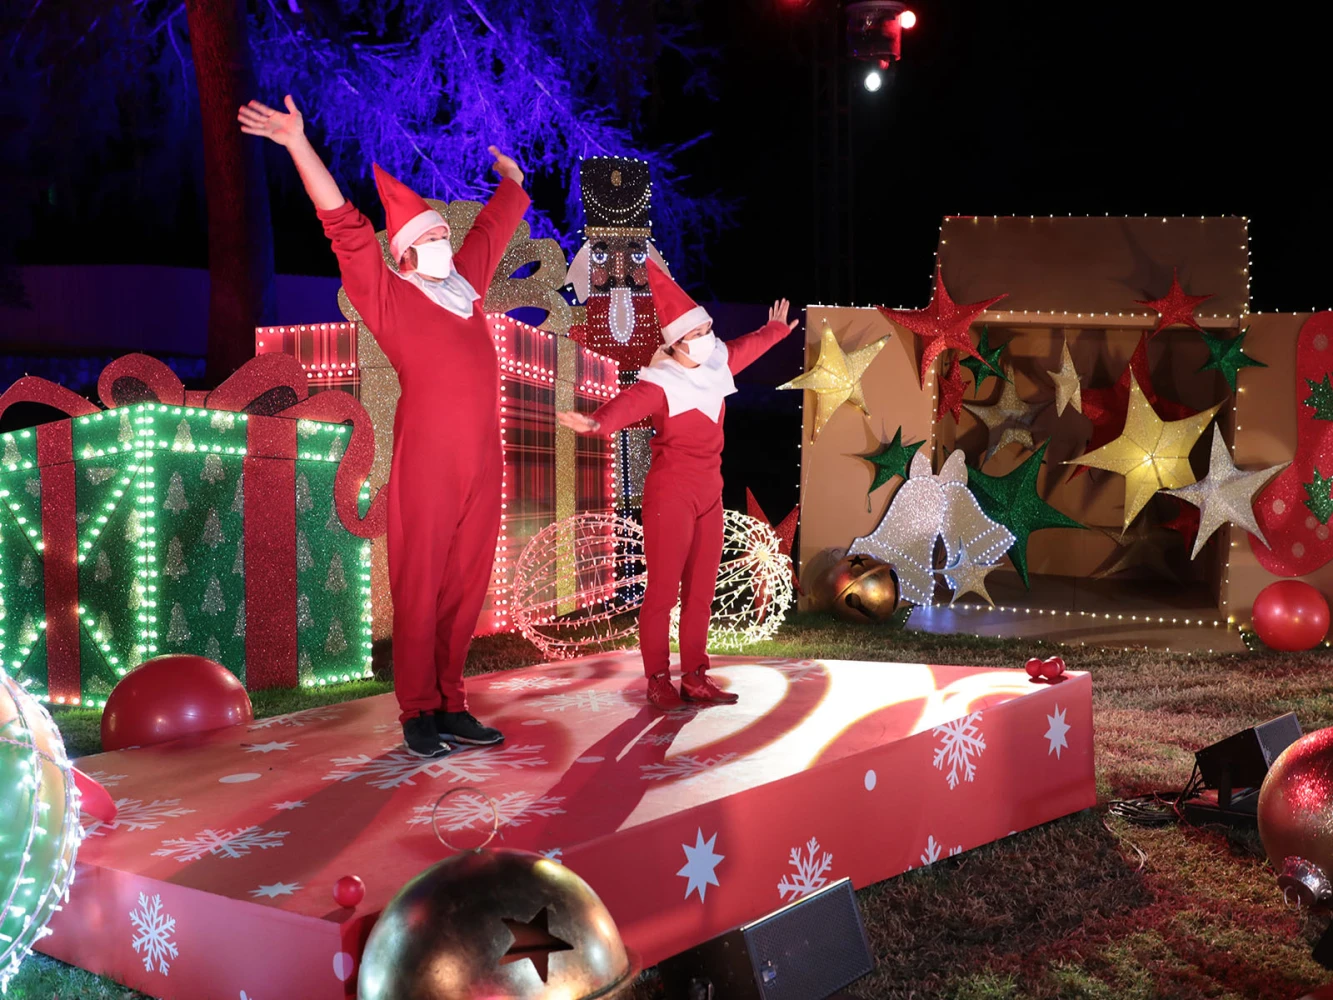 The Elf on the Shelf’s Magical Holiday Journey: What to expect - 2